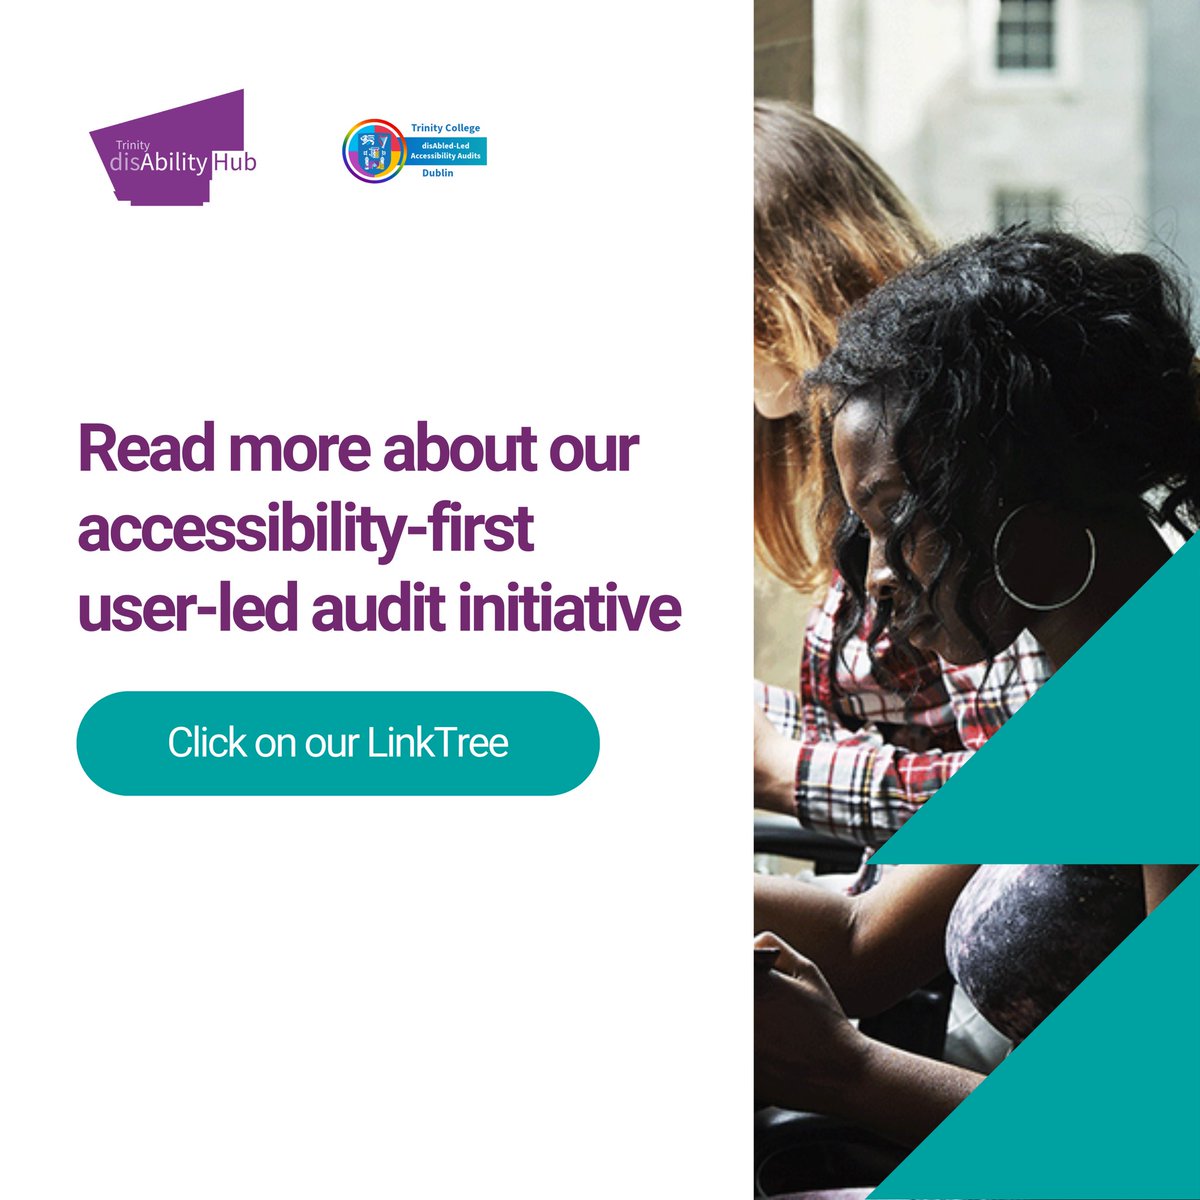 Global Accessibility Awareness Day - Improving accessibility for everyone. Read more about our User-Led Audit through our LinkTree 🌳